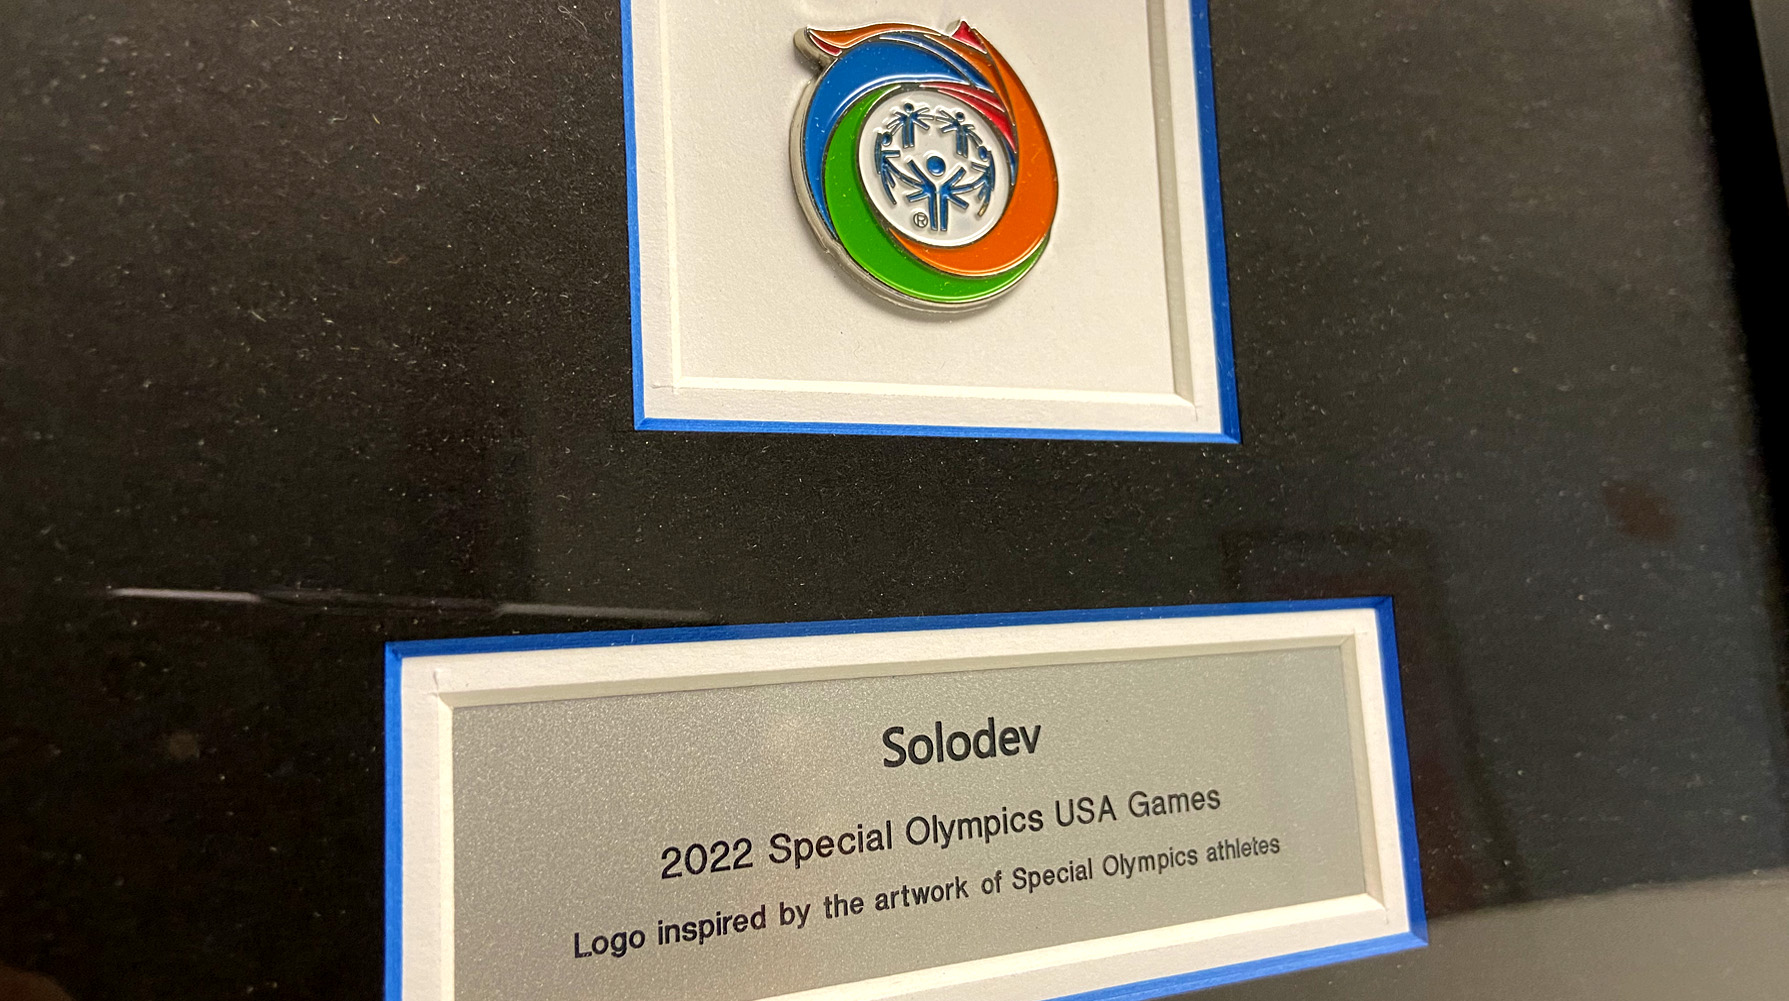 Solodev 2022 Special Olympics USA Games plate